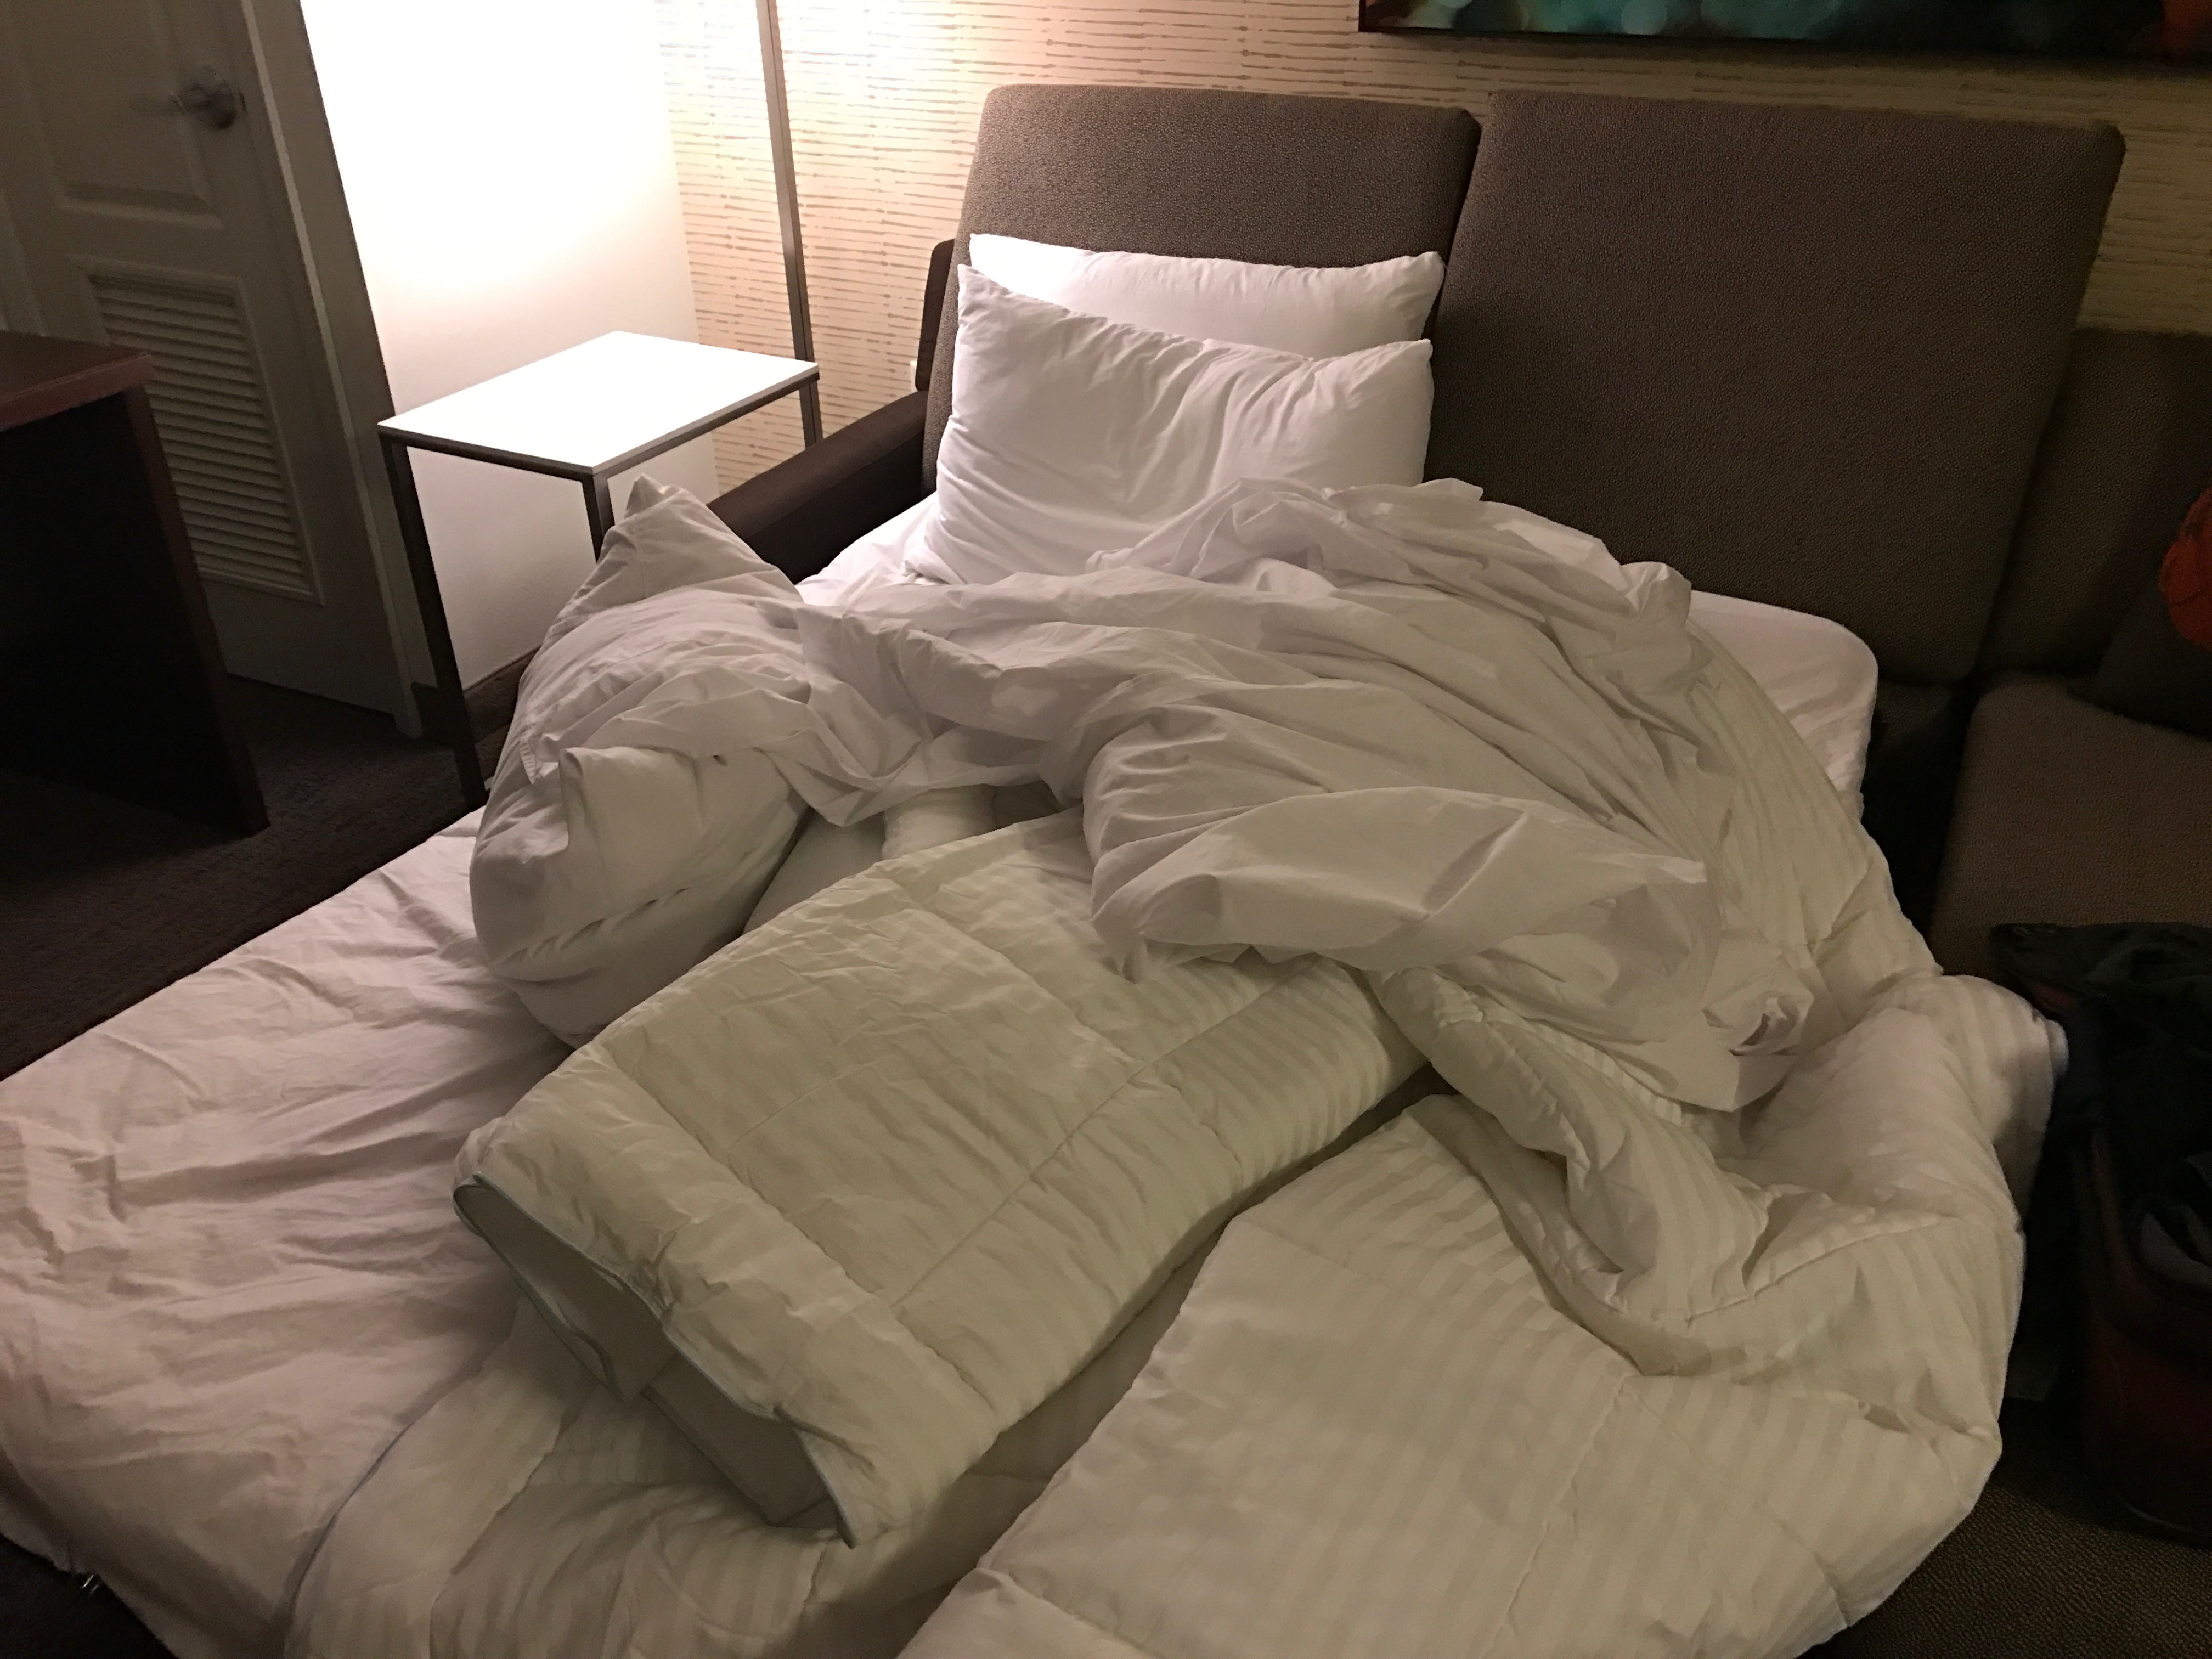 Should Housekeeping Make All The Beds During Your Hotel Stay